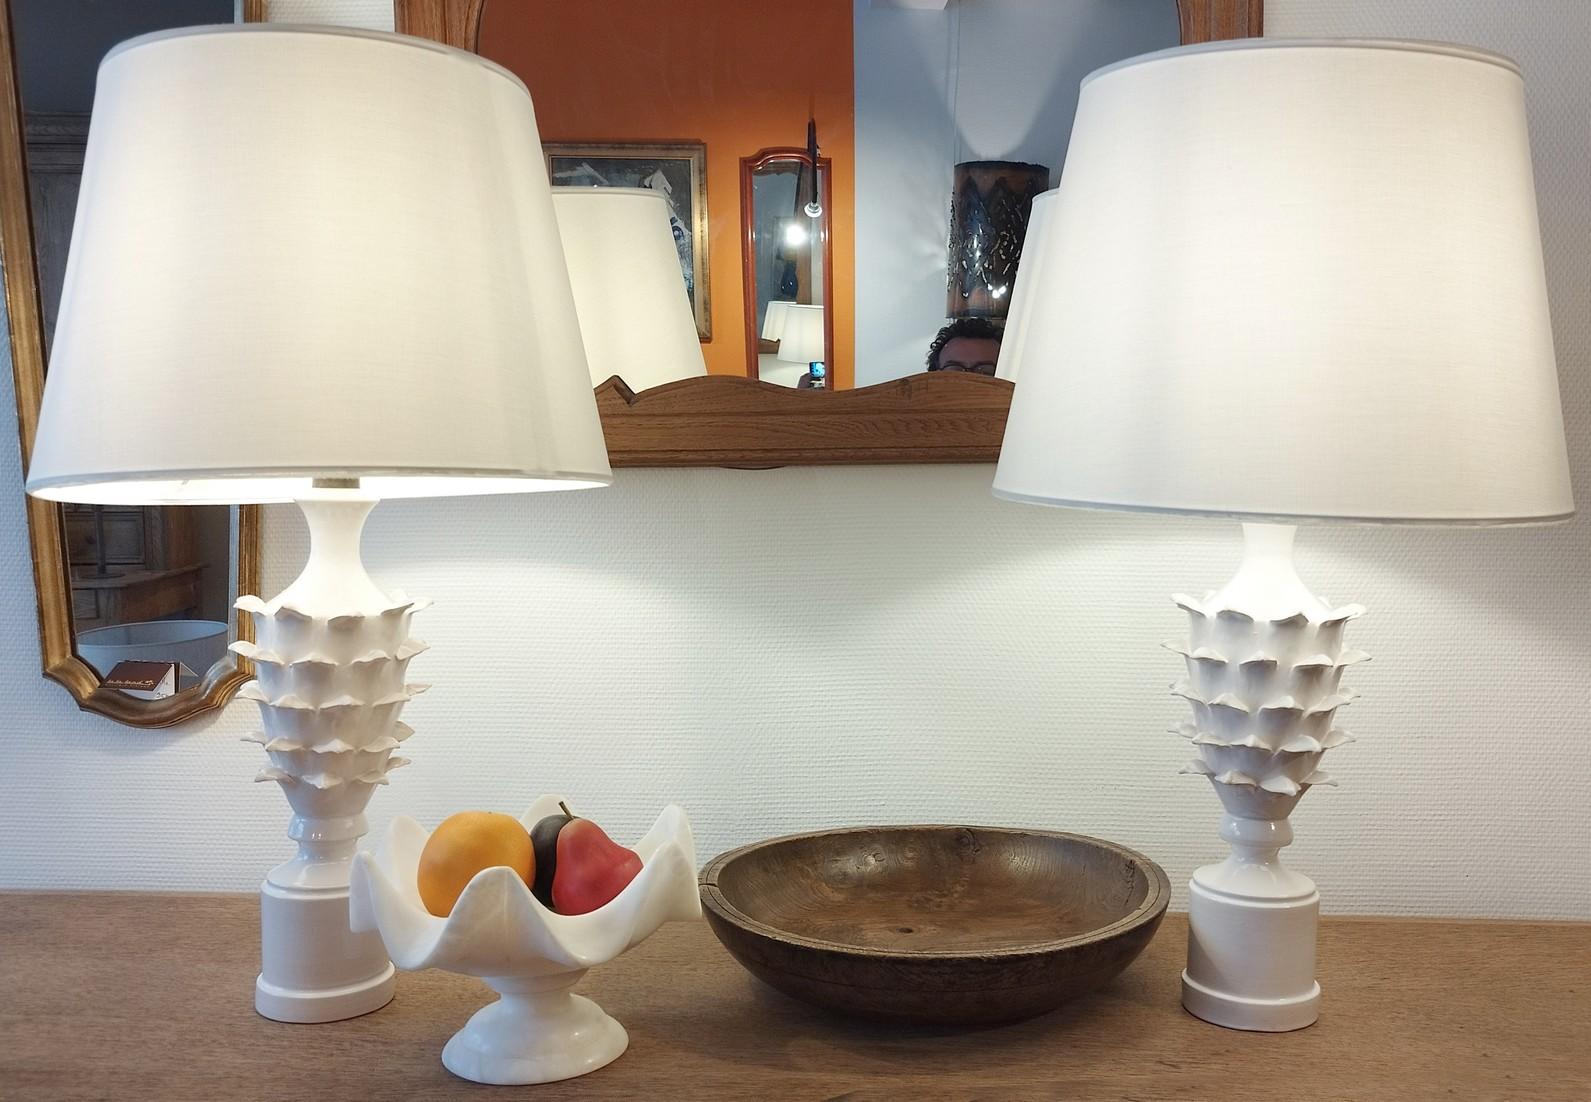 Superb and rather rare pair of Jean Roger lamps, circa 1960-1970, each signed underneath. The lamp bases dimensions are 19.2